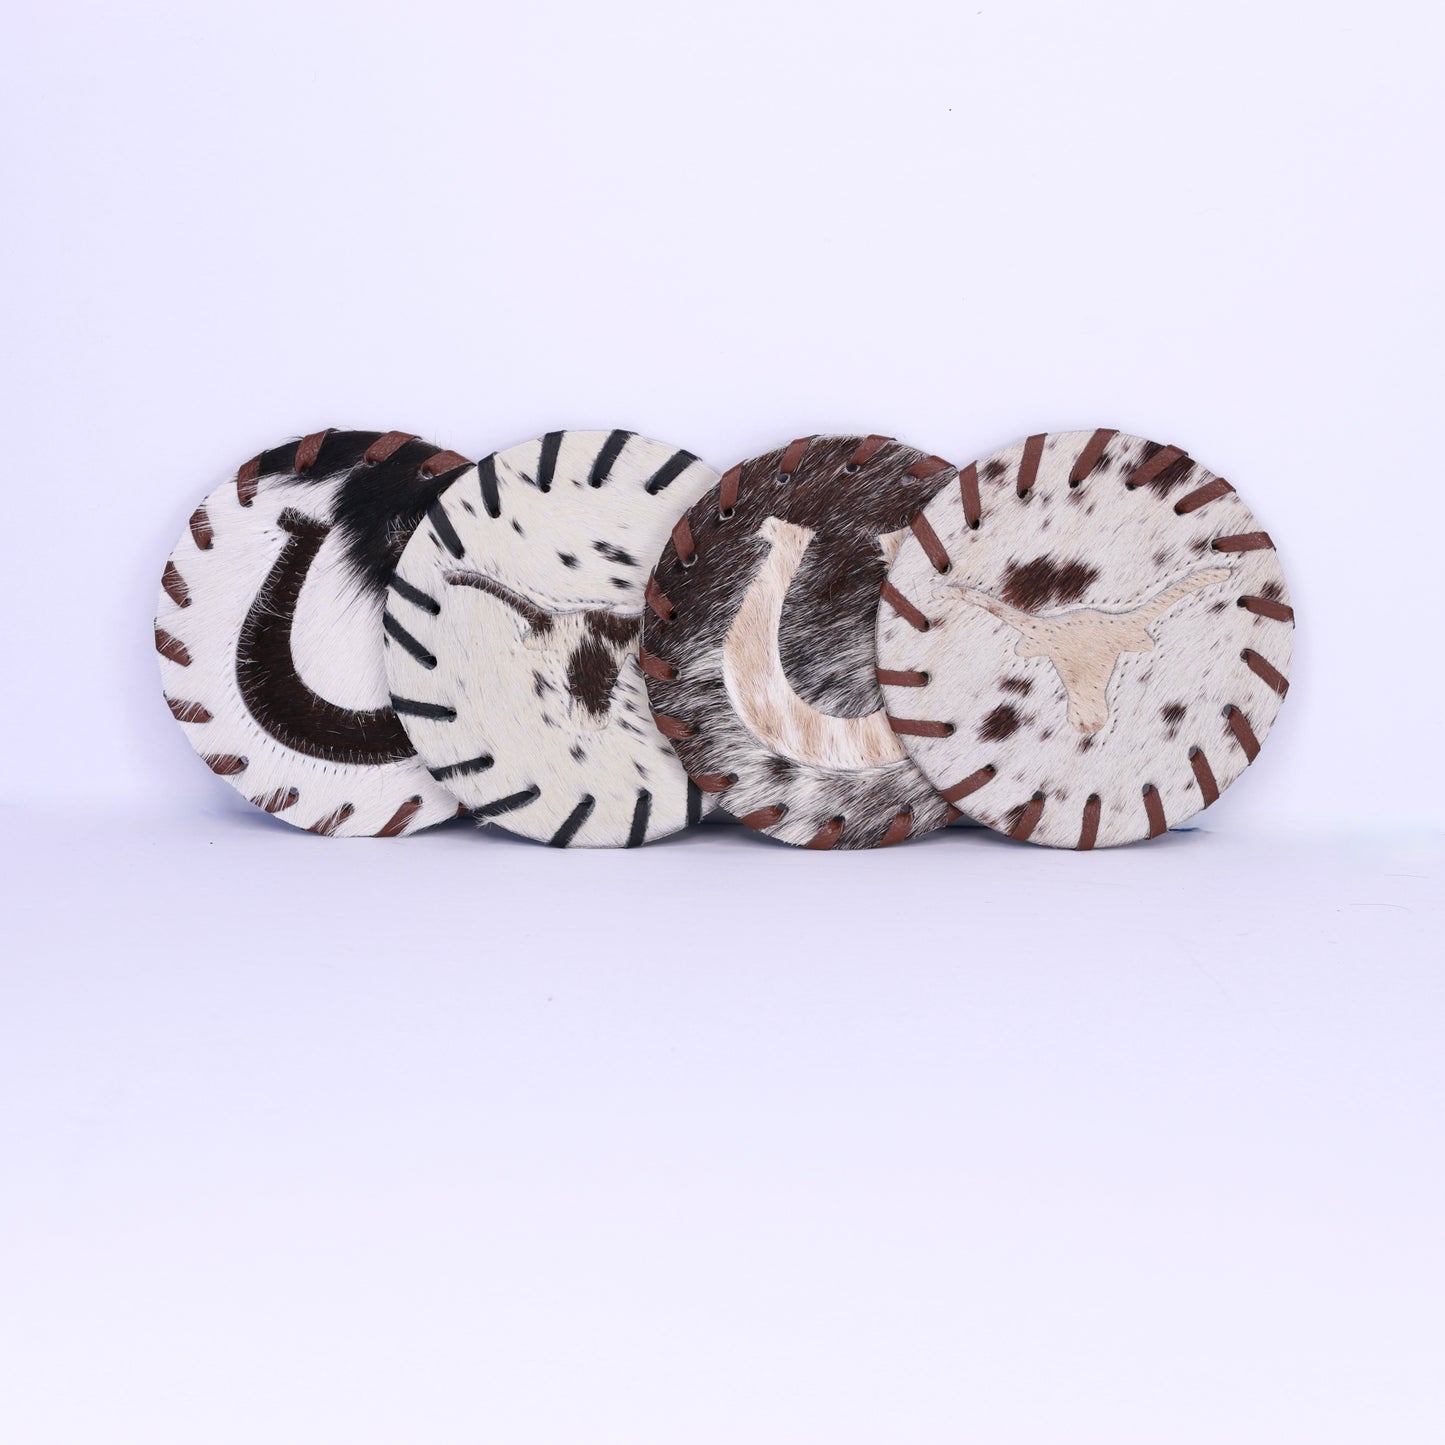 Texas Themed  Cowhide Coasters Plain and Assorted Tones ( Four Piece Set)